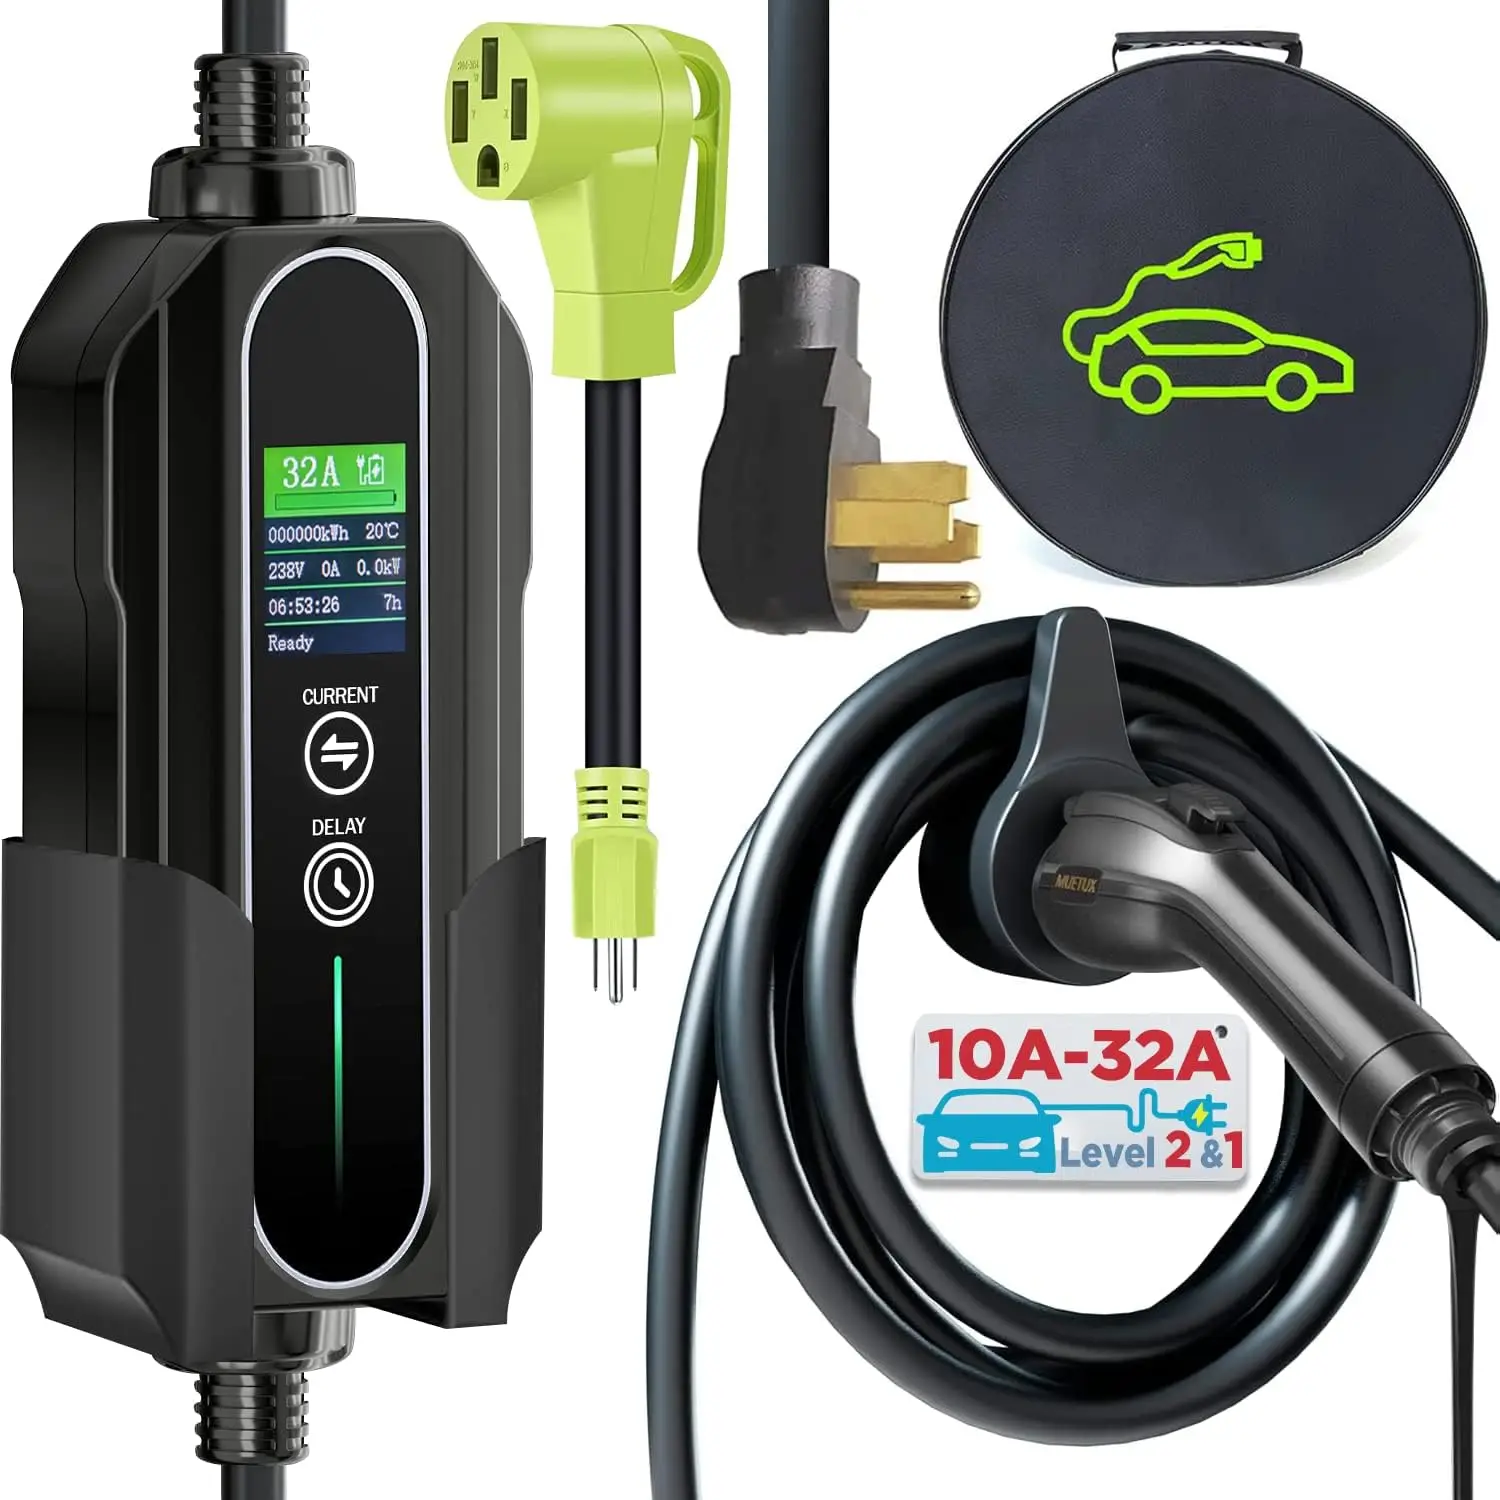 

2 & 1 EV Charger (10-32Amp, 110V-240V, 25ft Cable, SAE J1772), Home/Outdoor Portable Vehicle with NEMA 14-50P/5-15P to 14-5